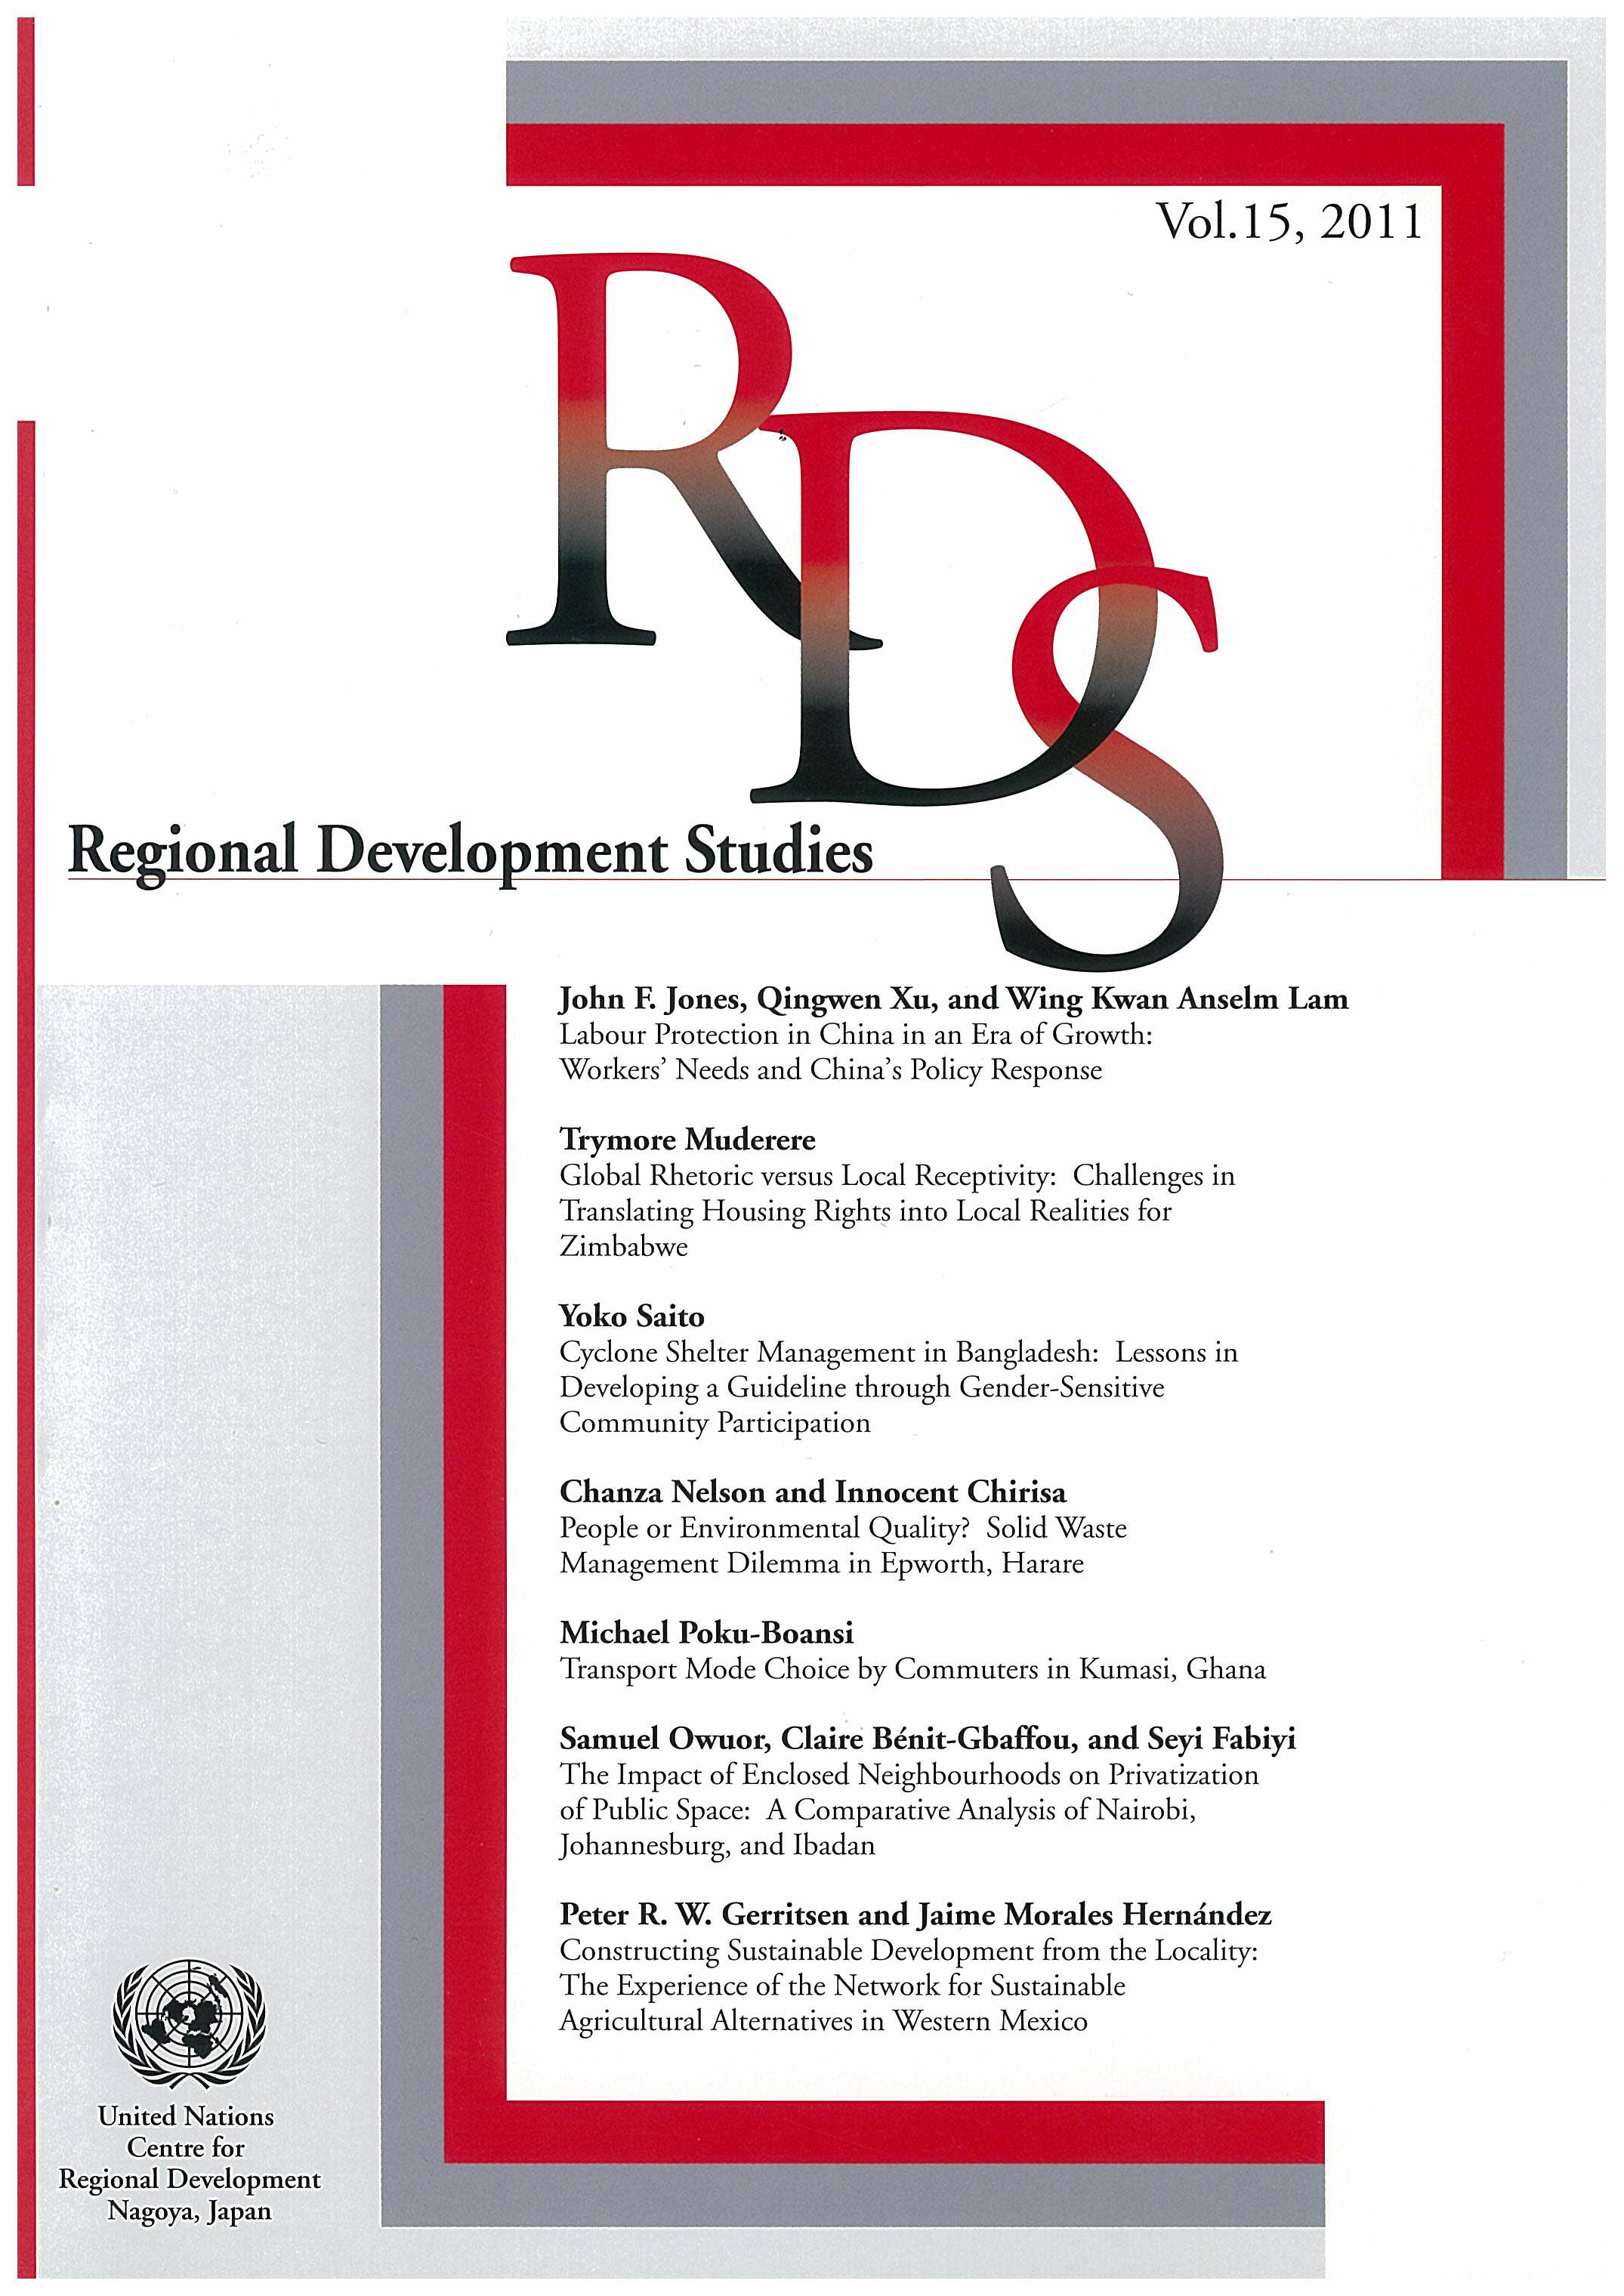 Publications - Periodicals | United Nations Centre for Regional Development